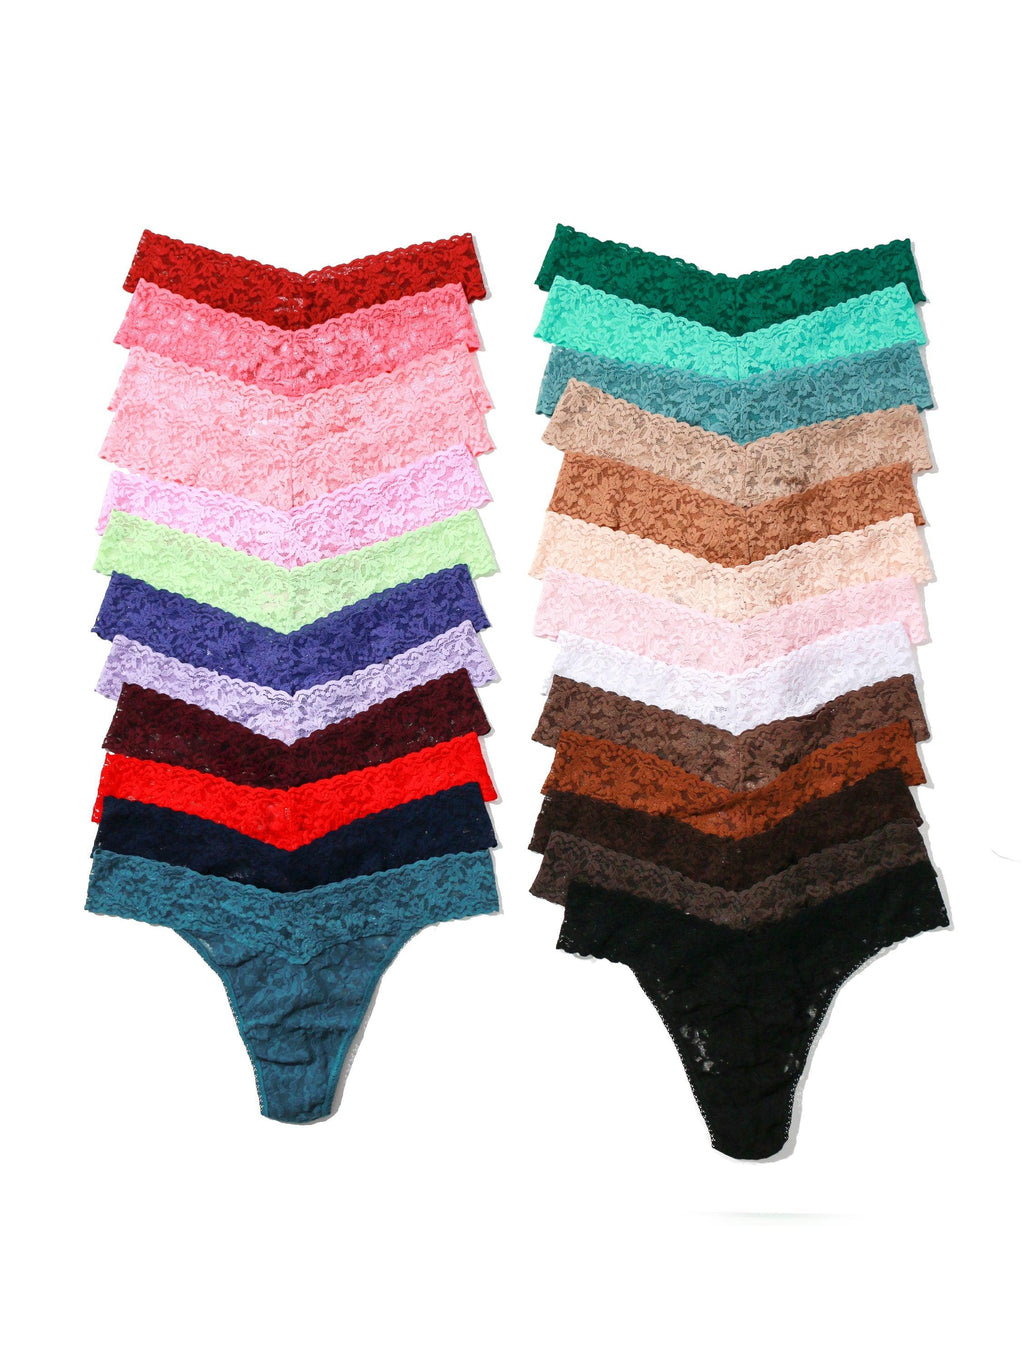 25 Different Types of Panties for Women